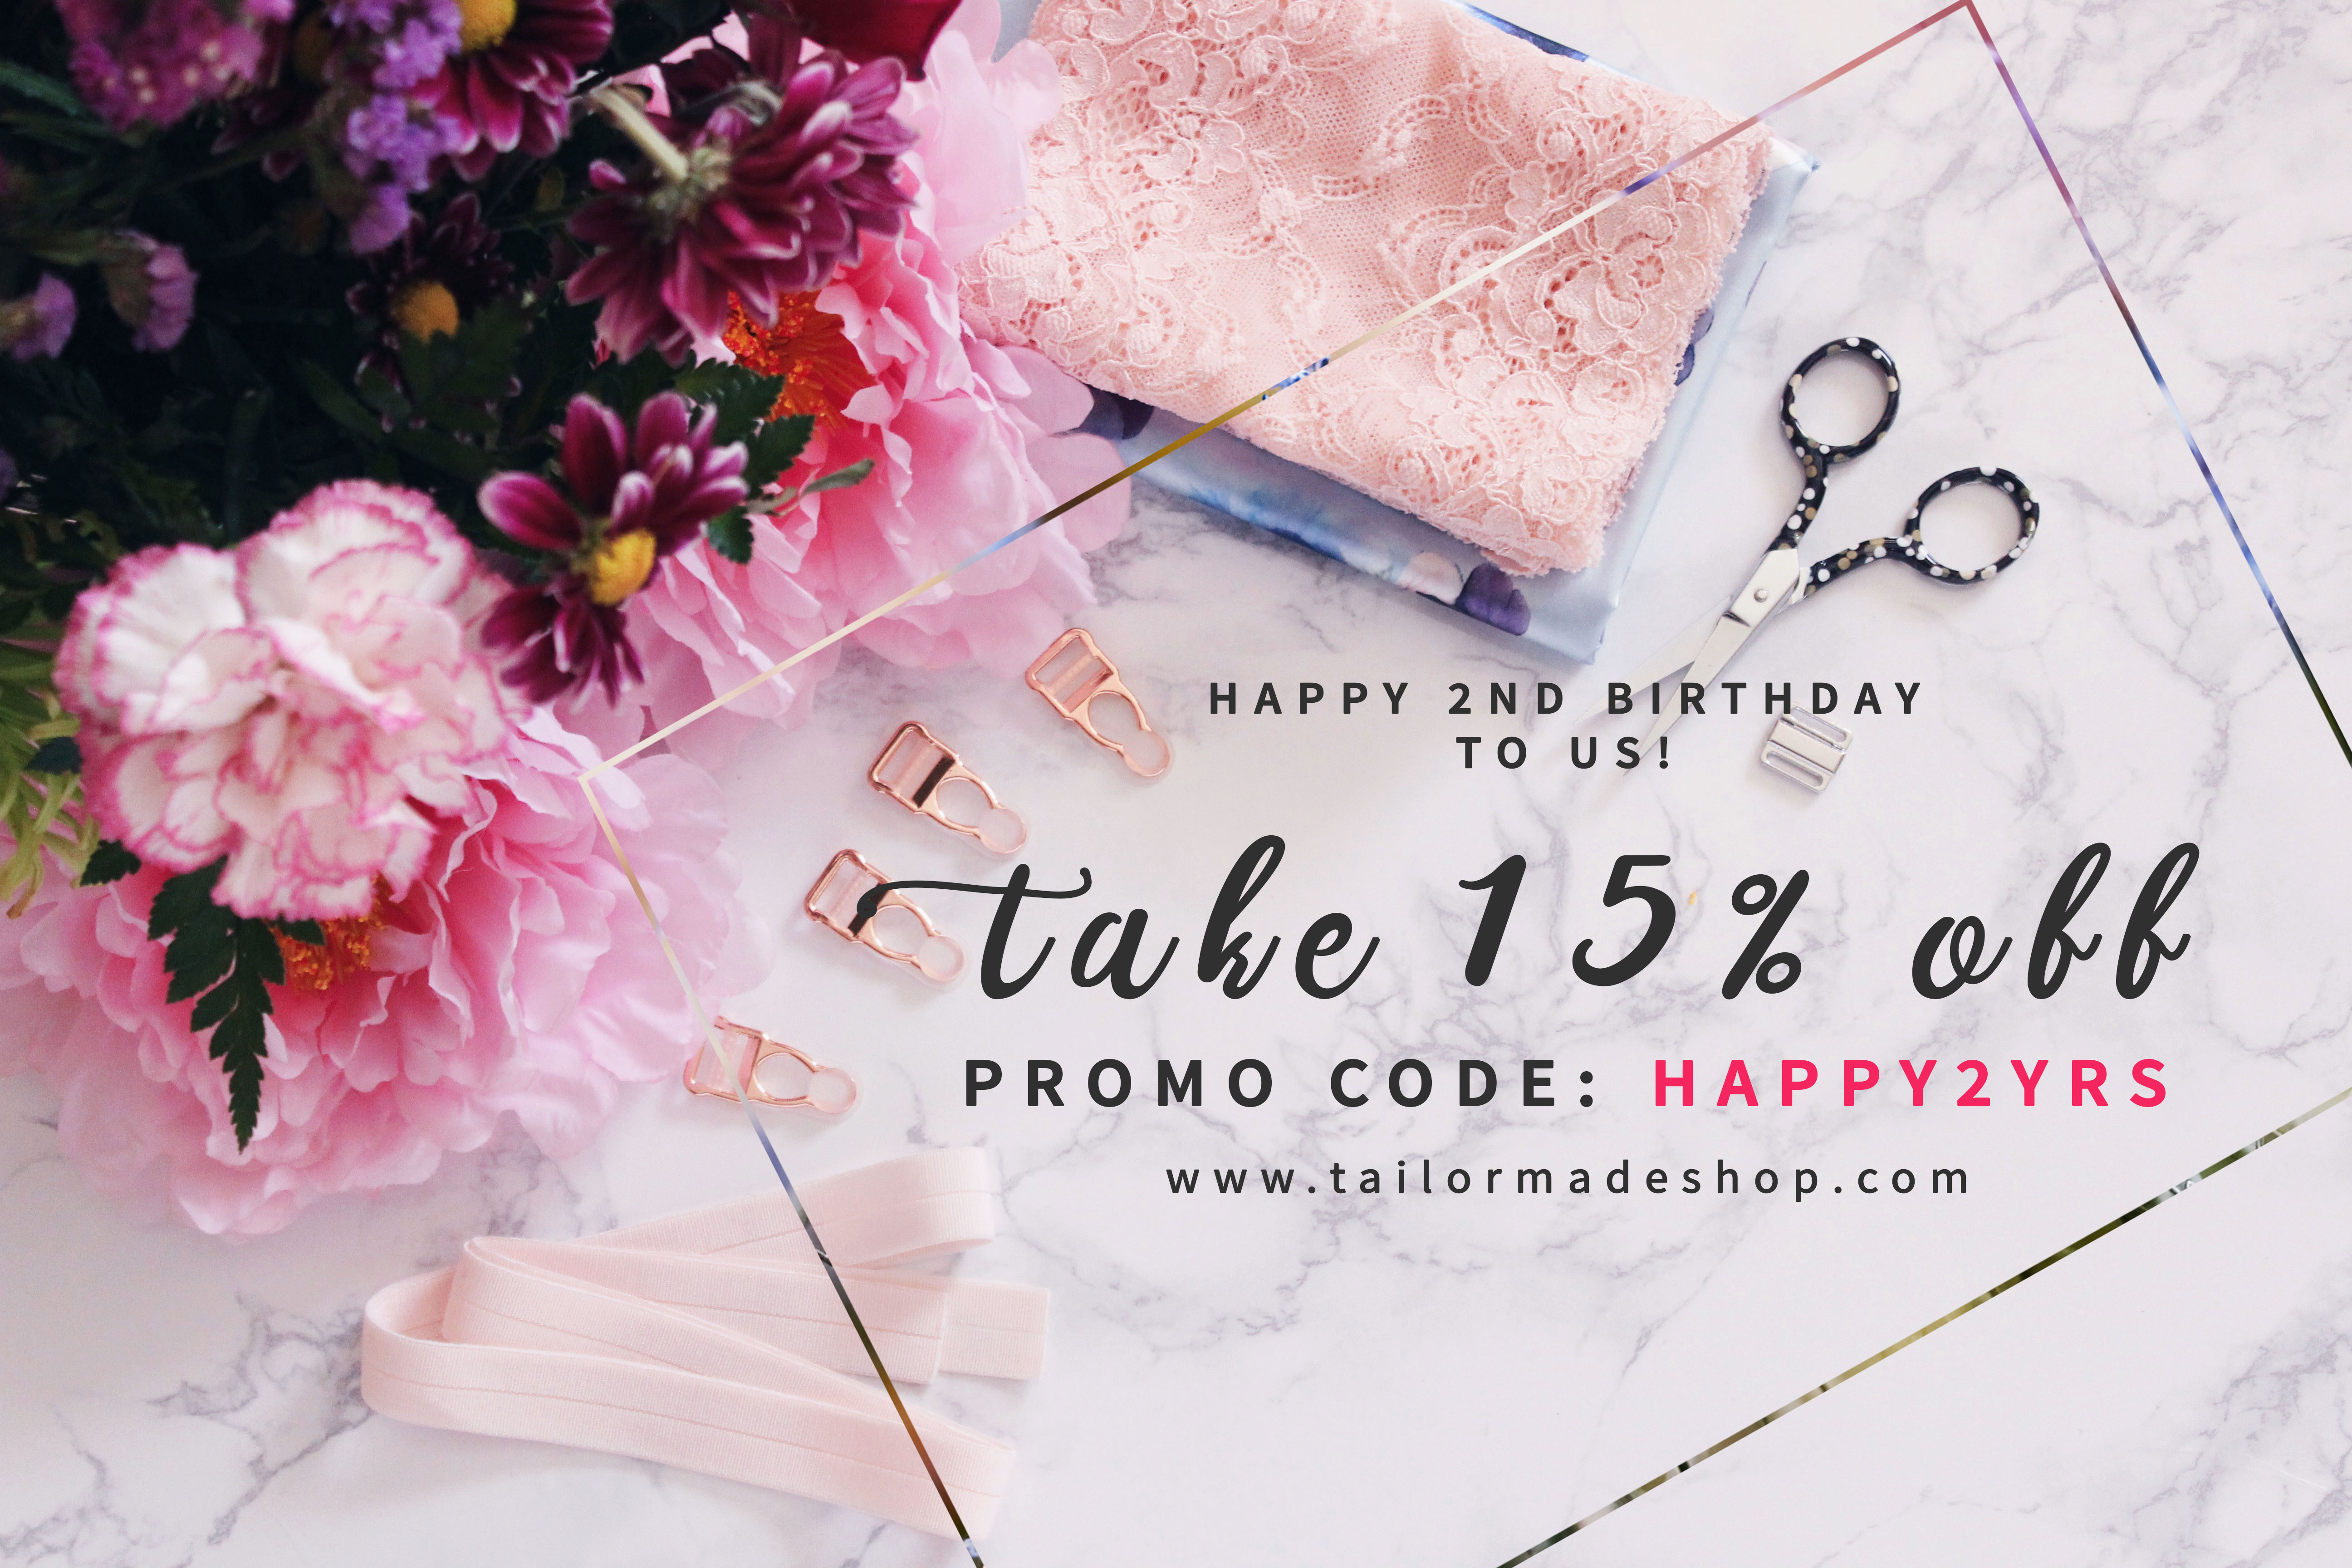 Tailor Made Shop Memorial Day Sale 2nd Birthday Sale 15% Off Coupon Discount